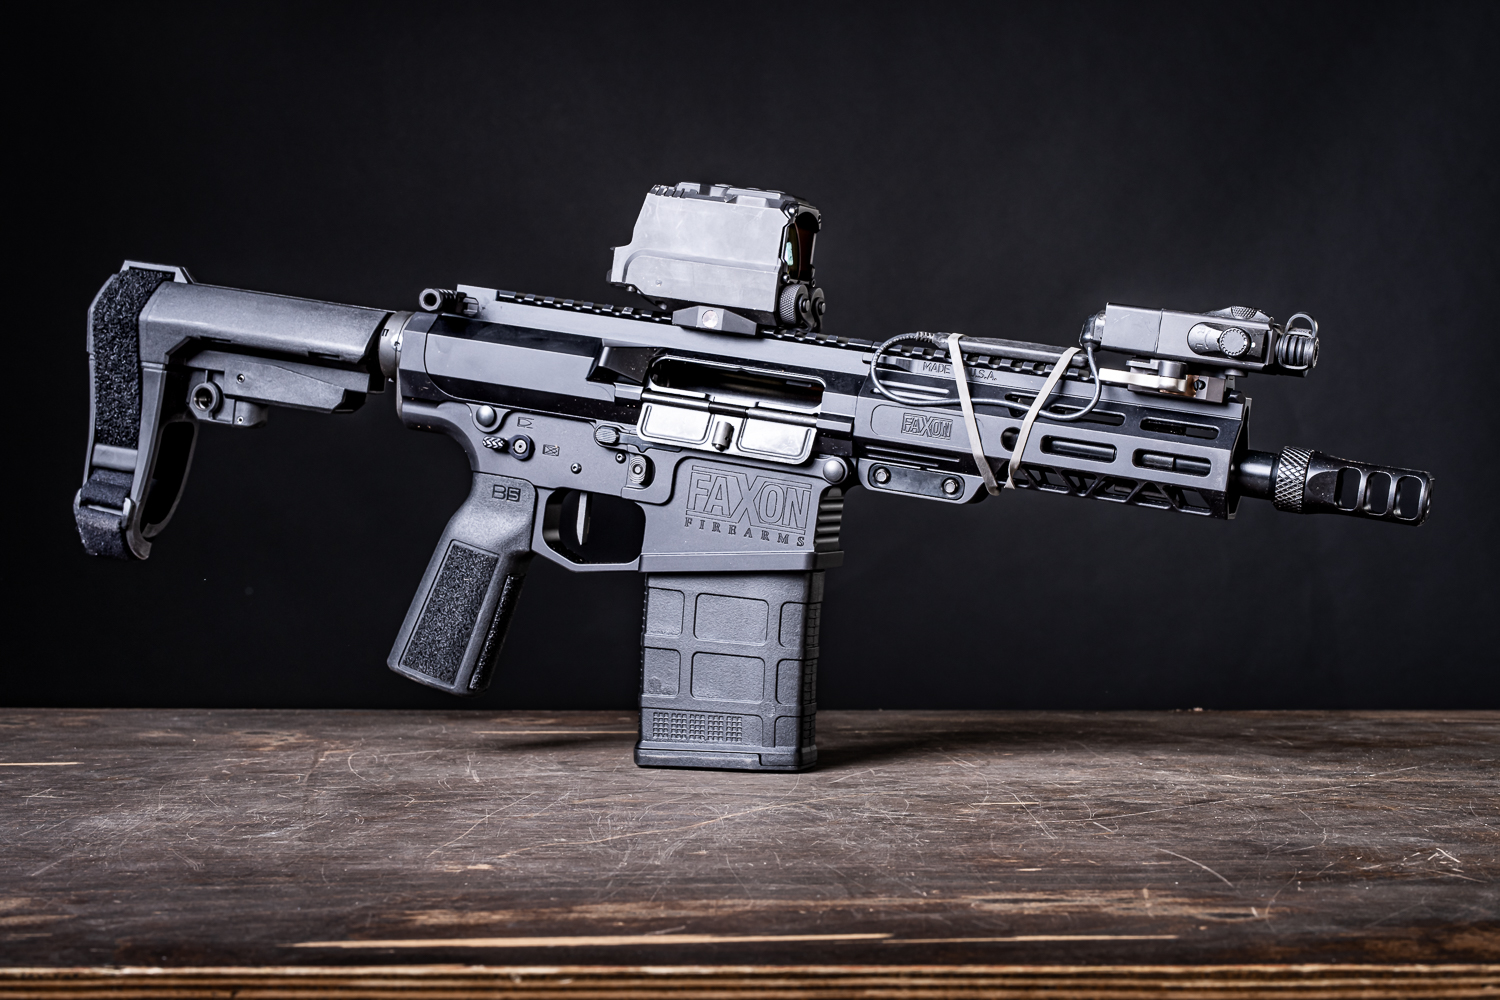 The Sentinel 8" 8.6 BLK AR-10 Pistol from Faxon.